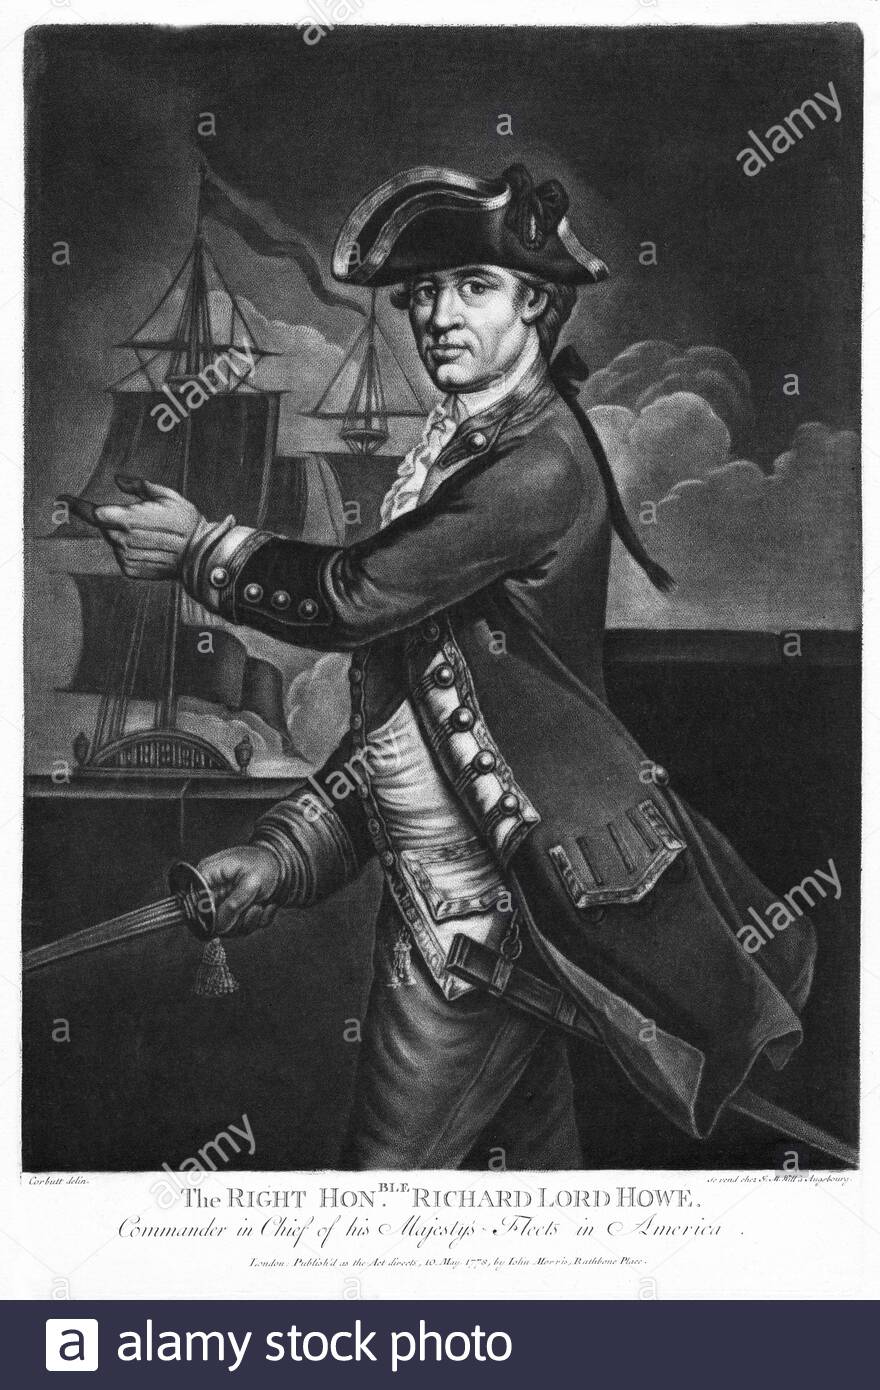 Admiral of the Fleet, Richard Howe, 1st Earl Howe, 1726 – 1799, was a British naval officer, vintage illustration from 1778 Stock Photo